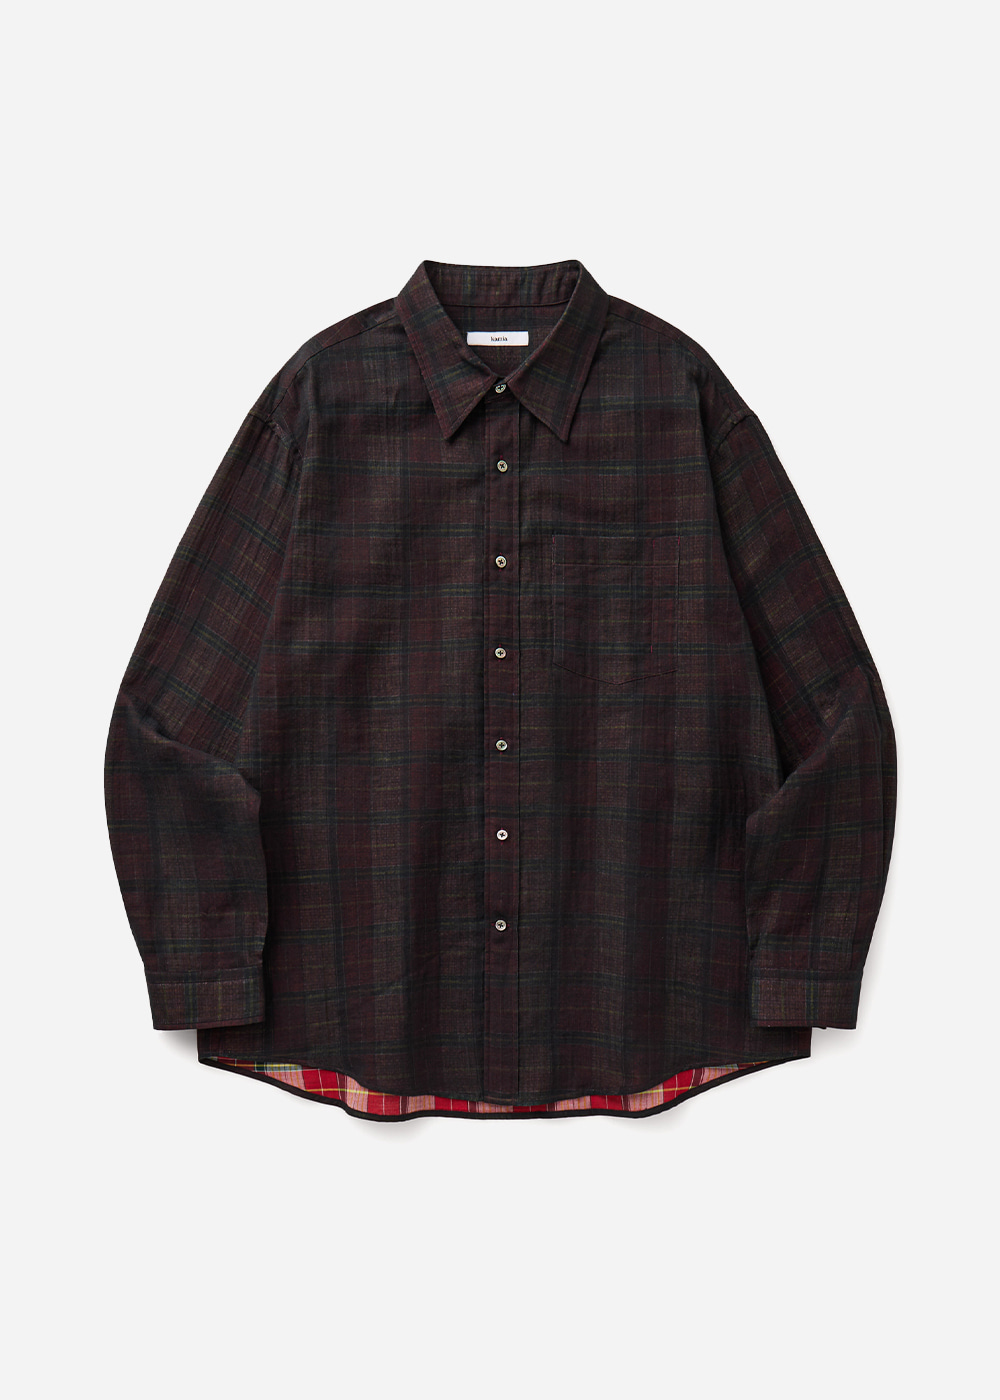 DOUBLE FACE CHECK SHIRTS [BROWN/RED]